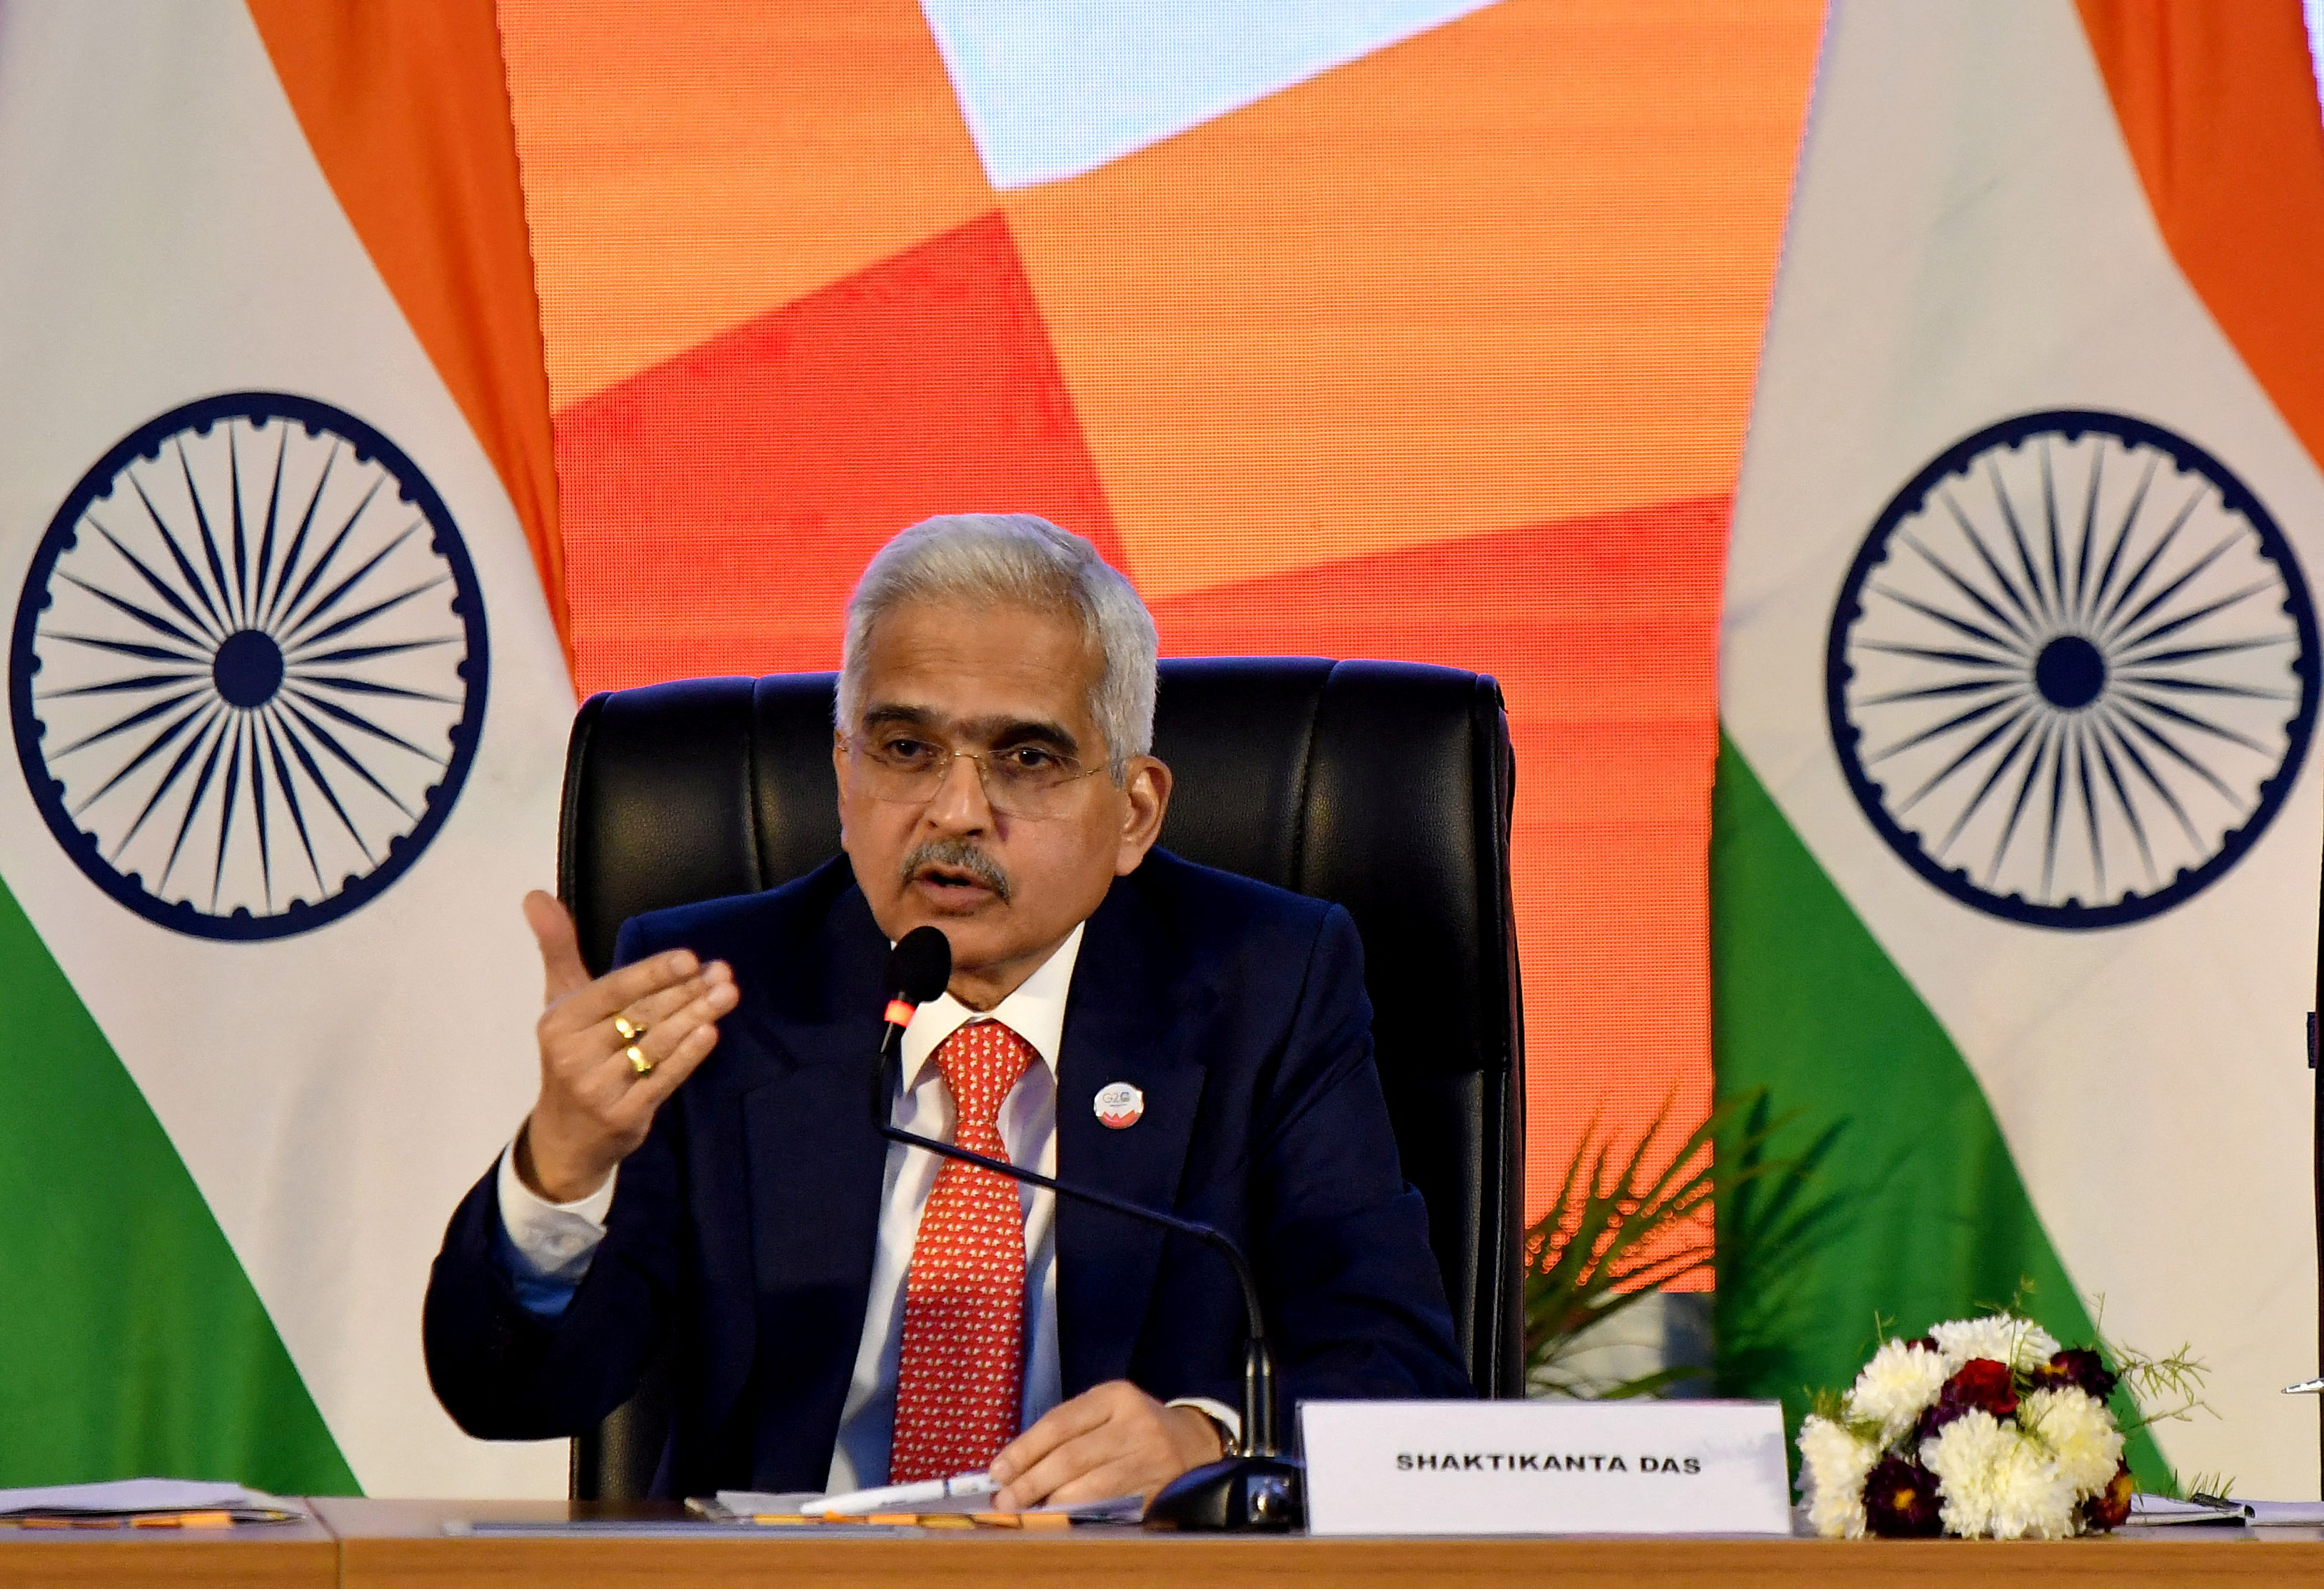 India's Reserve Bank of India Governor Shaktikanta Das speaks during a news conference on outskirts of Bengaluru